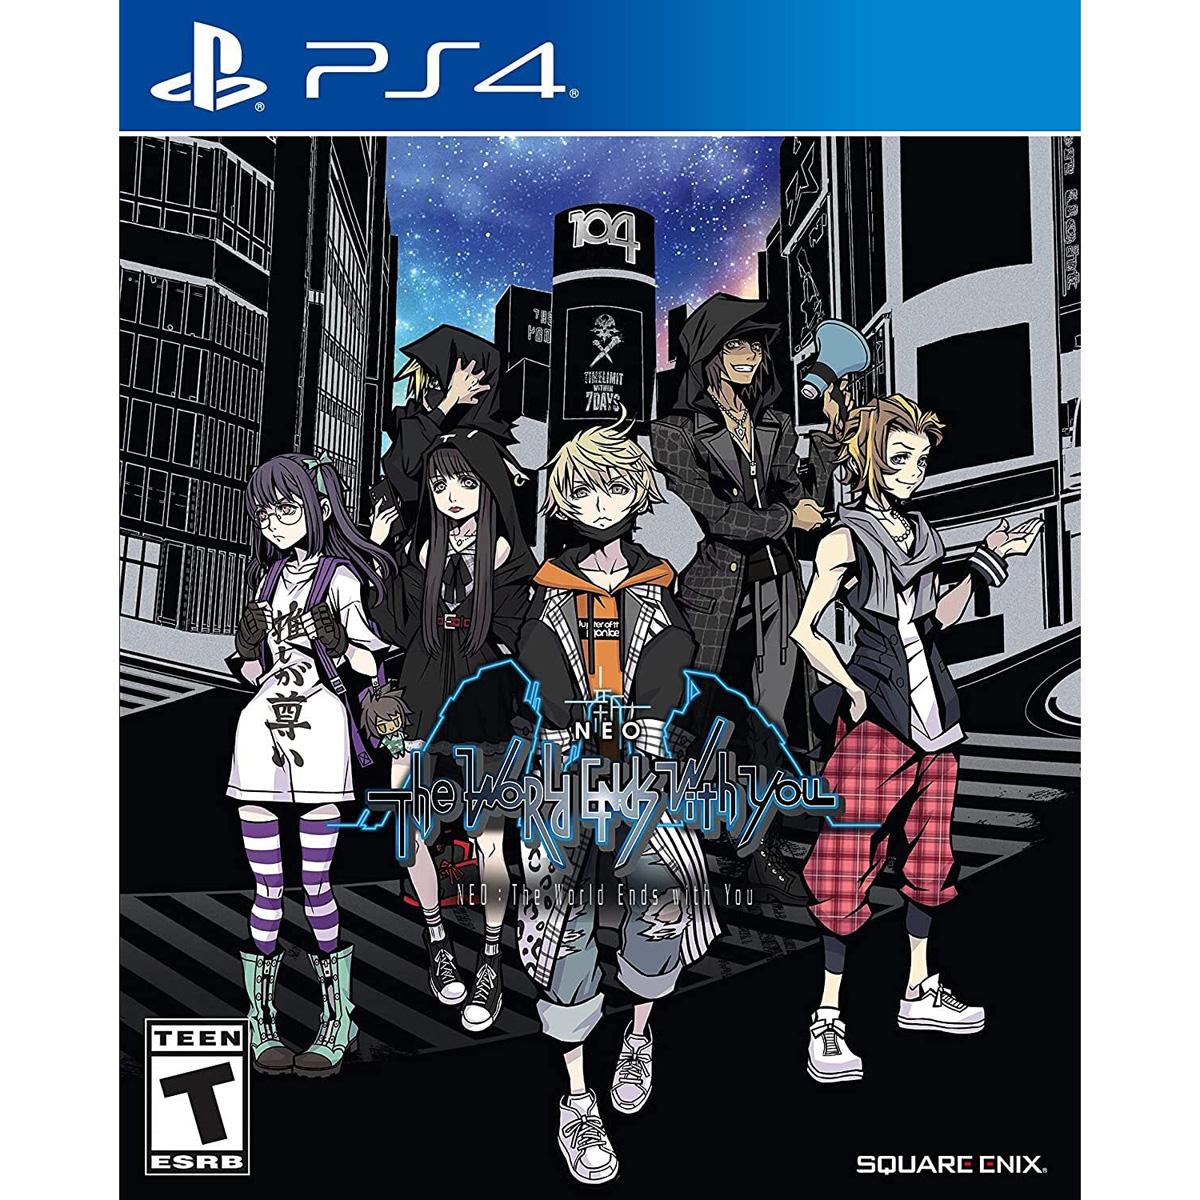 NEO The World Ends with You PS4 for $19.99